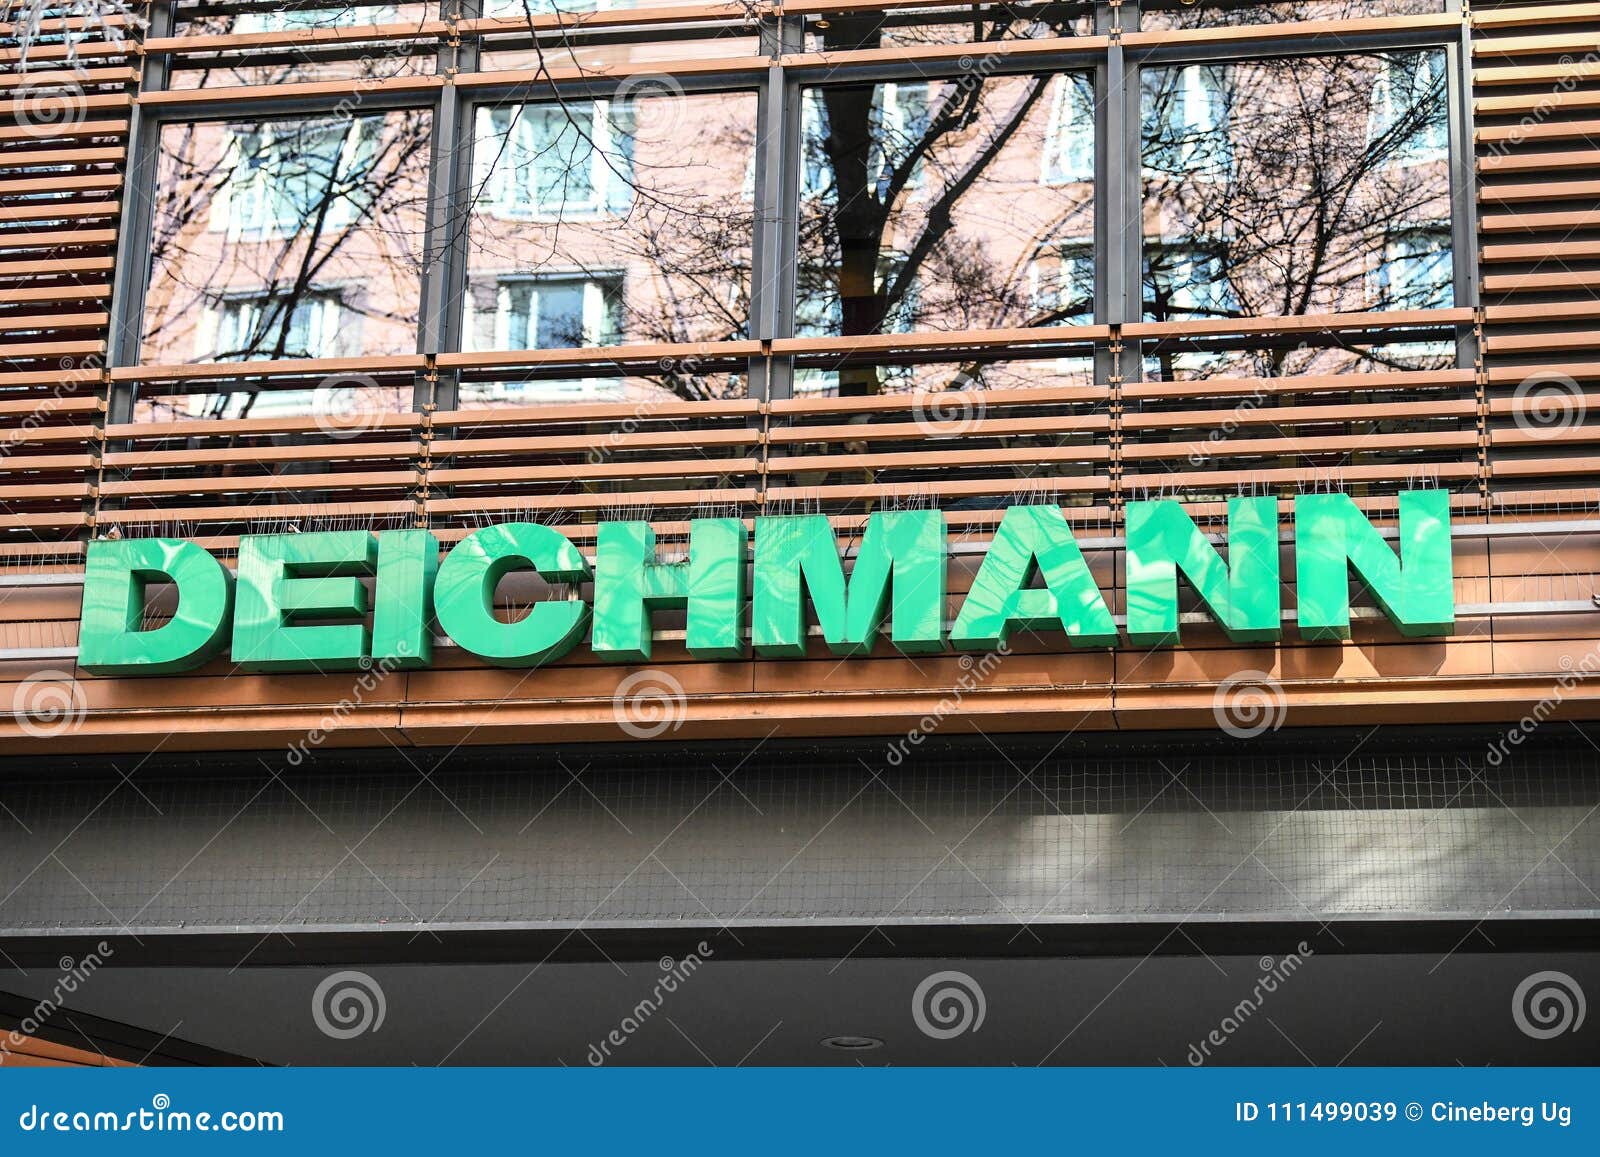 Estate Halvkreds Picasso Deichmann shoe store editorial stock image. Image of business - 111499039